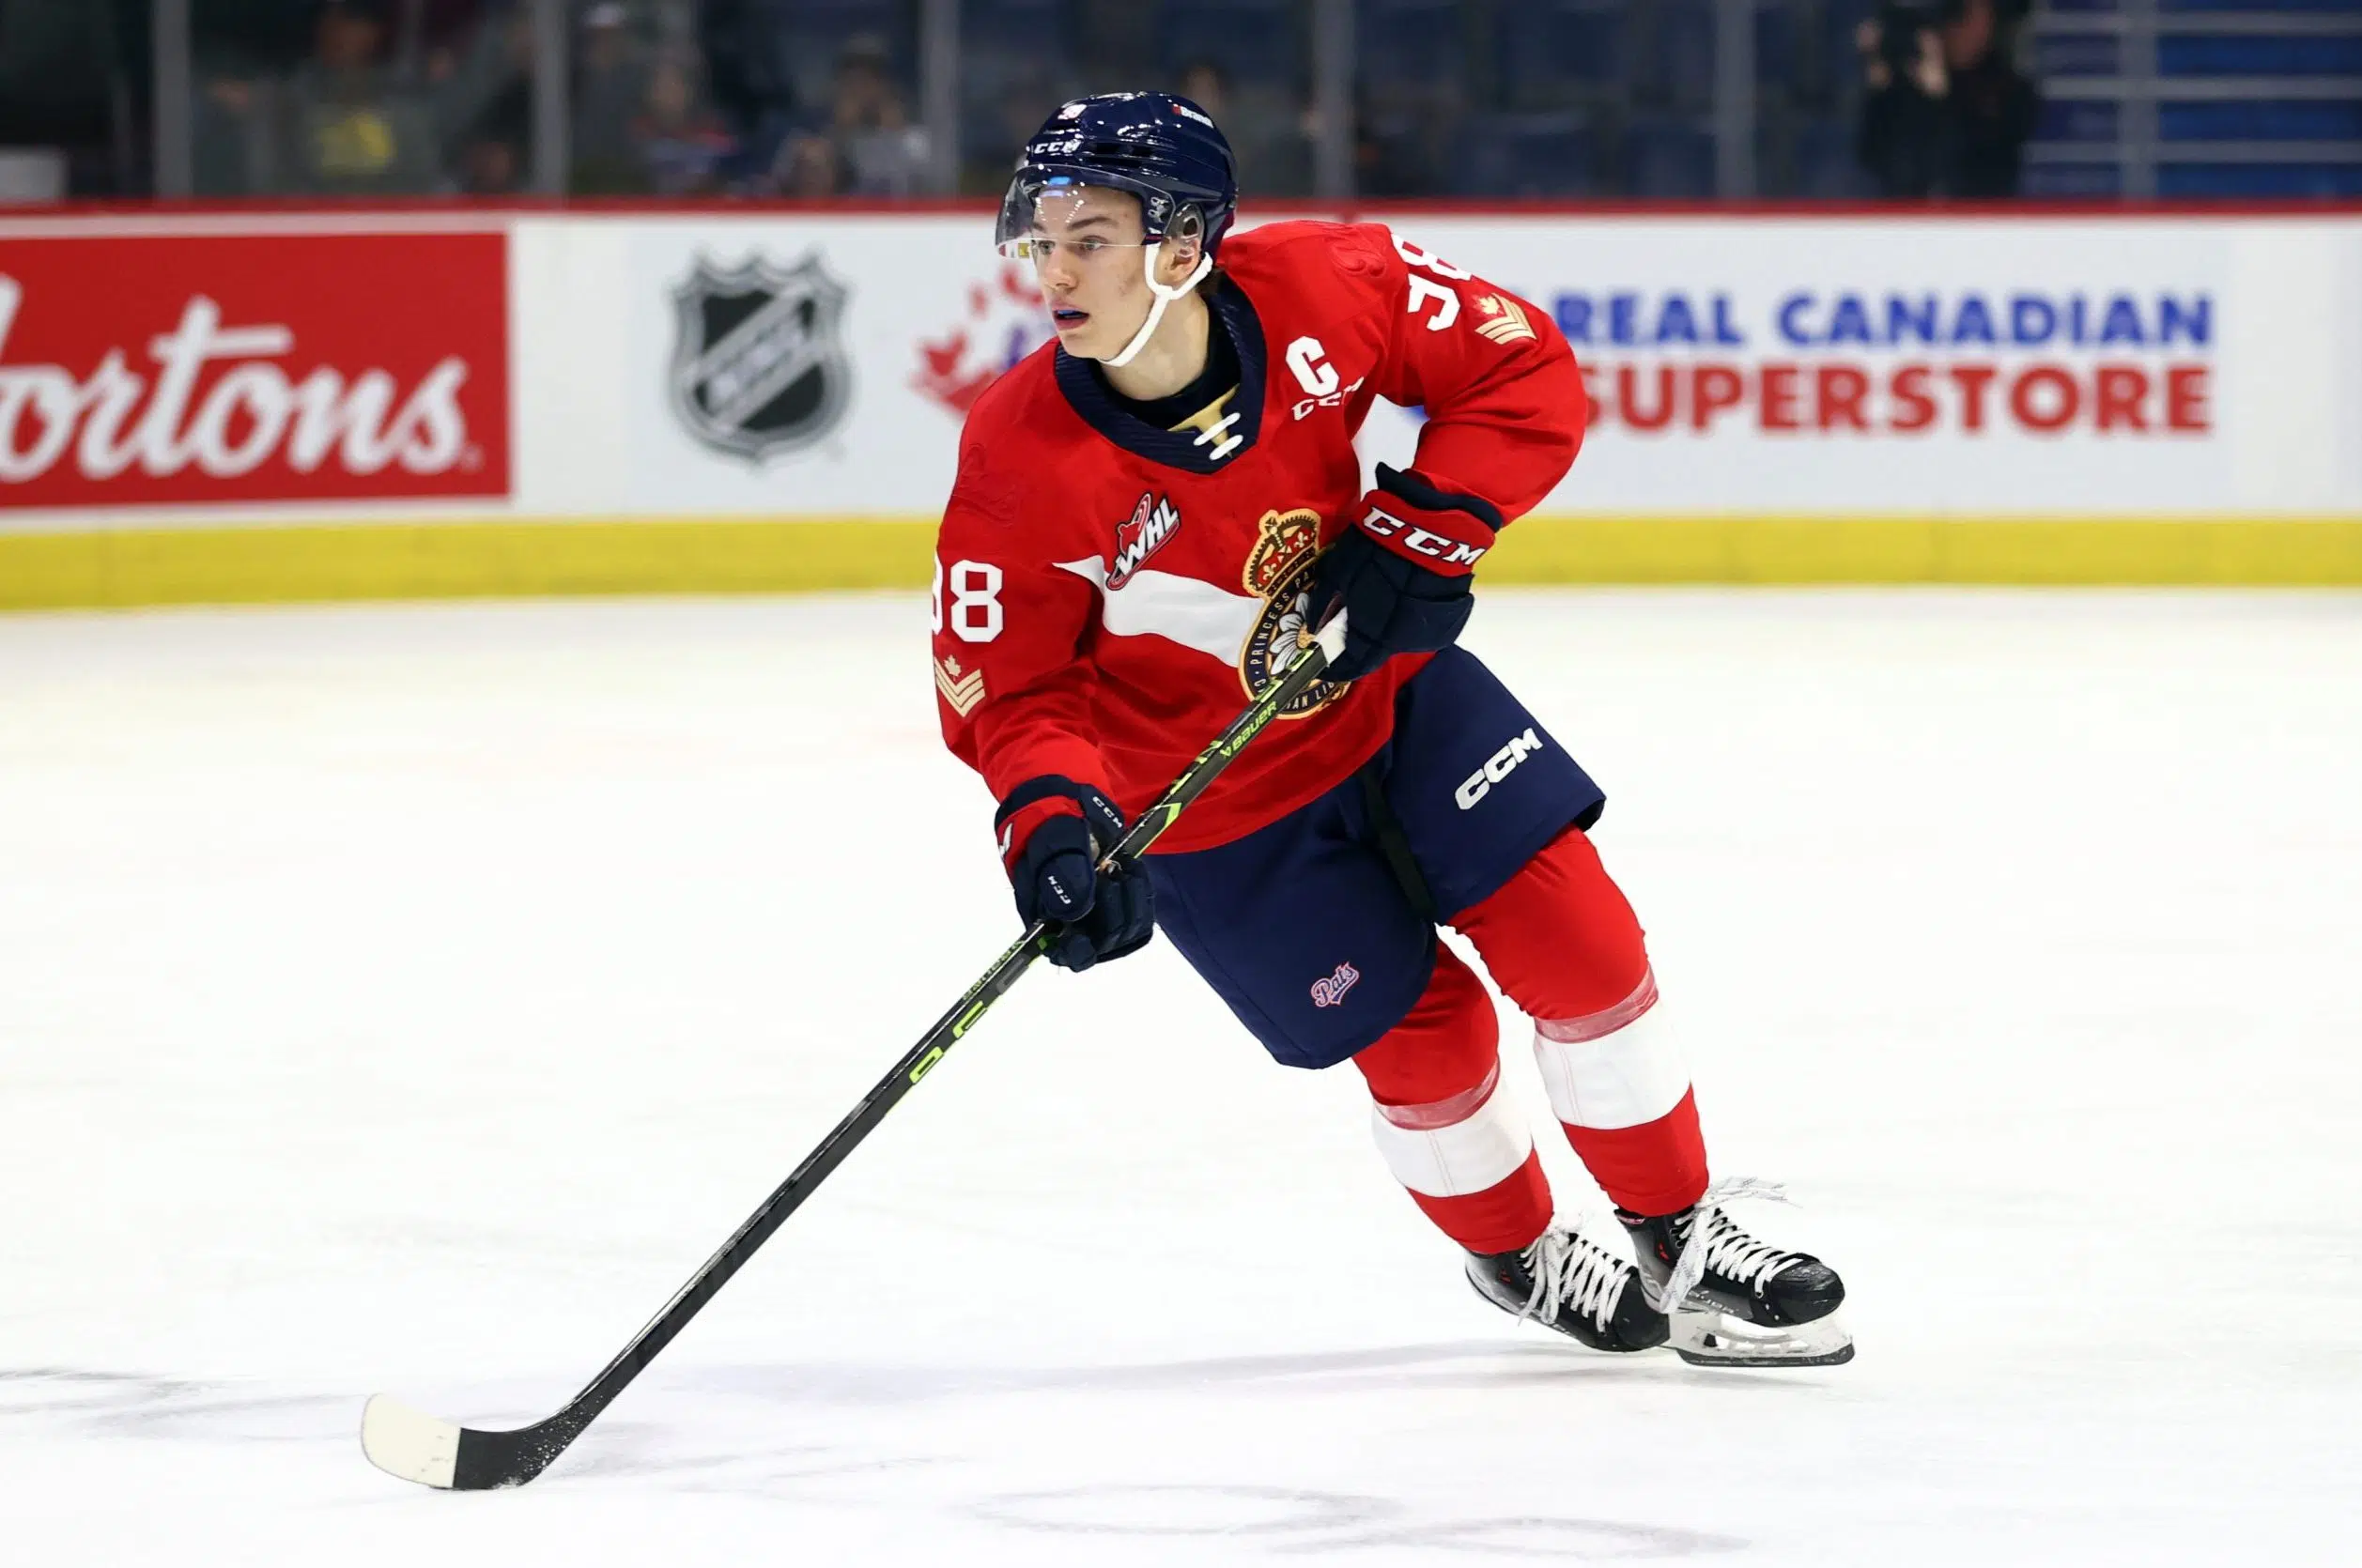 Pats' Bedard earns A rating from NHL Central Scouting